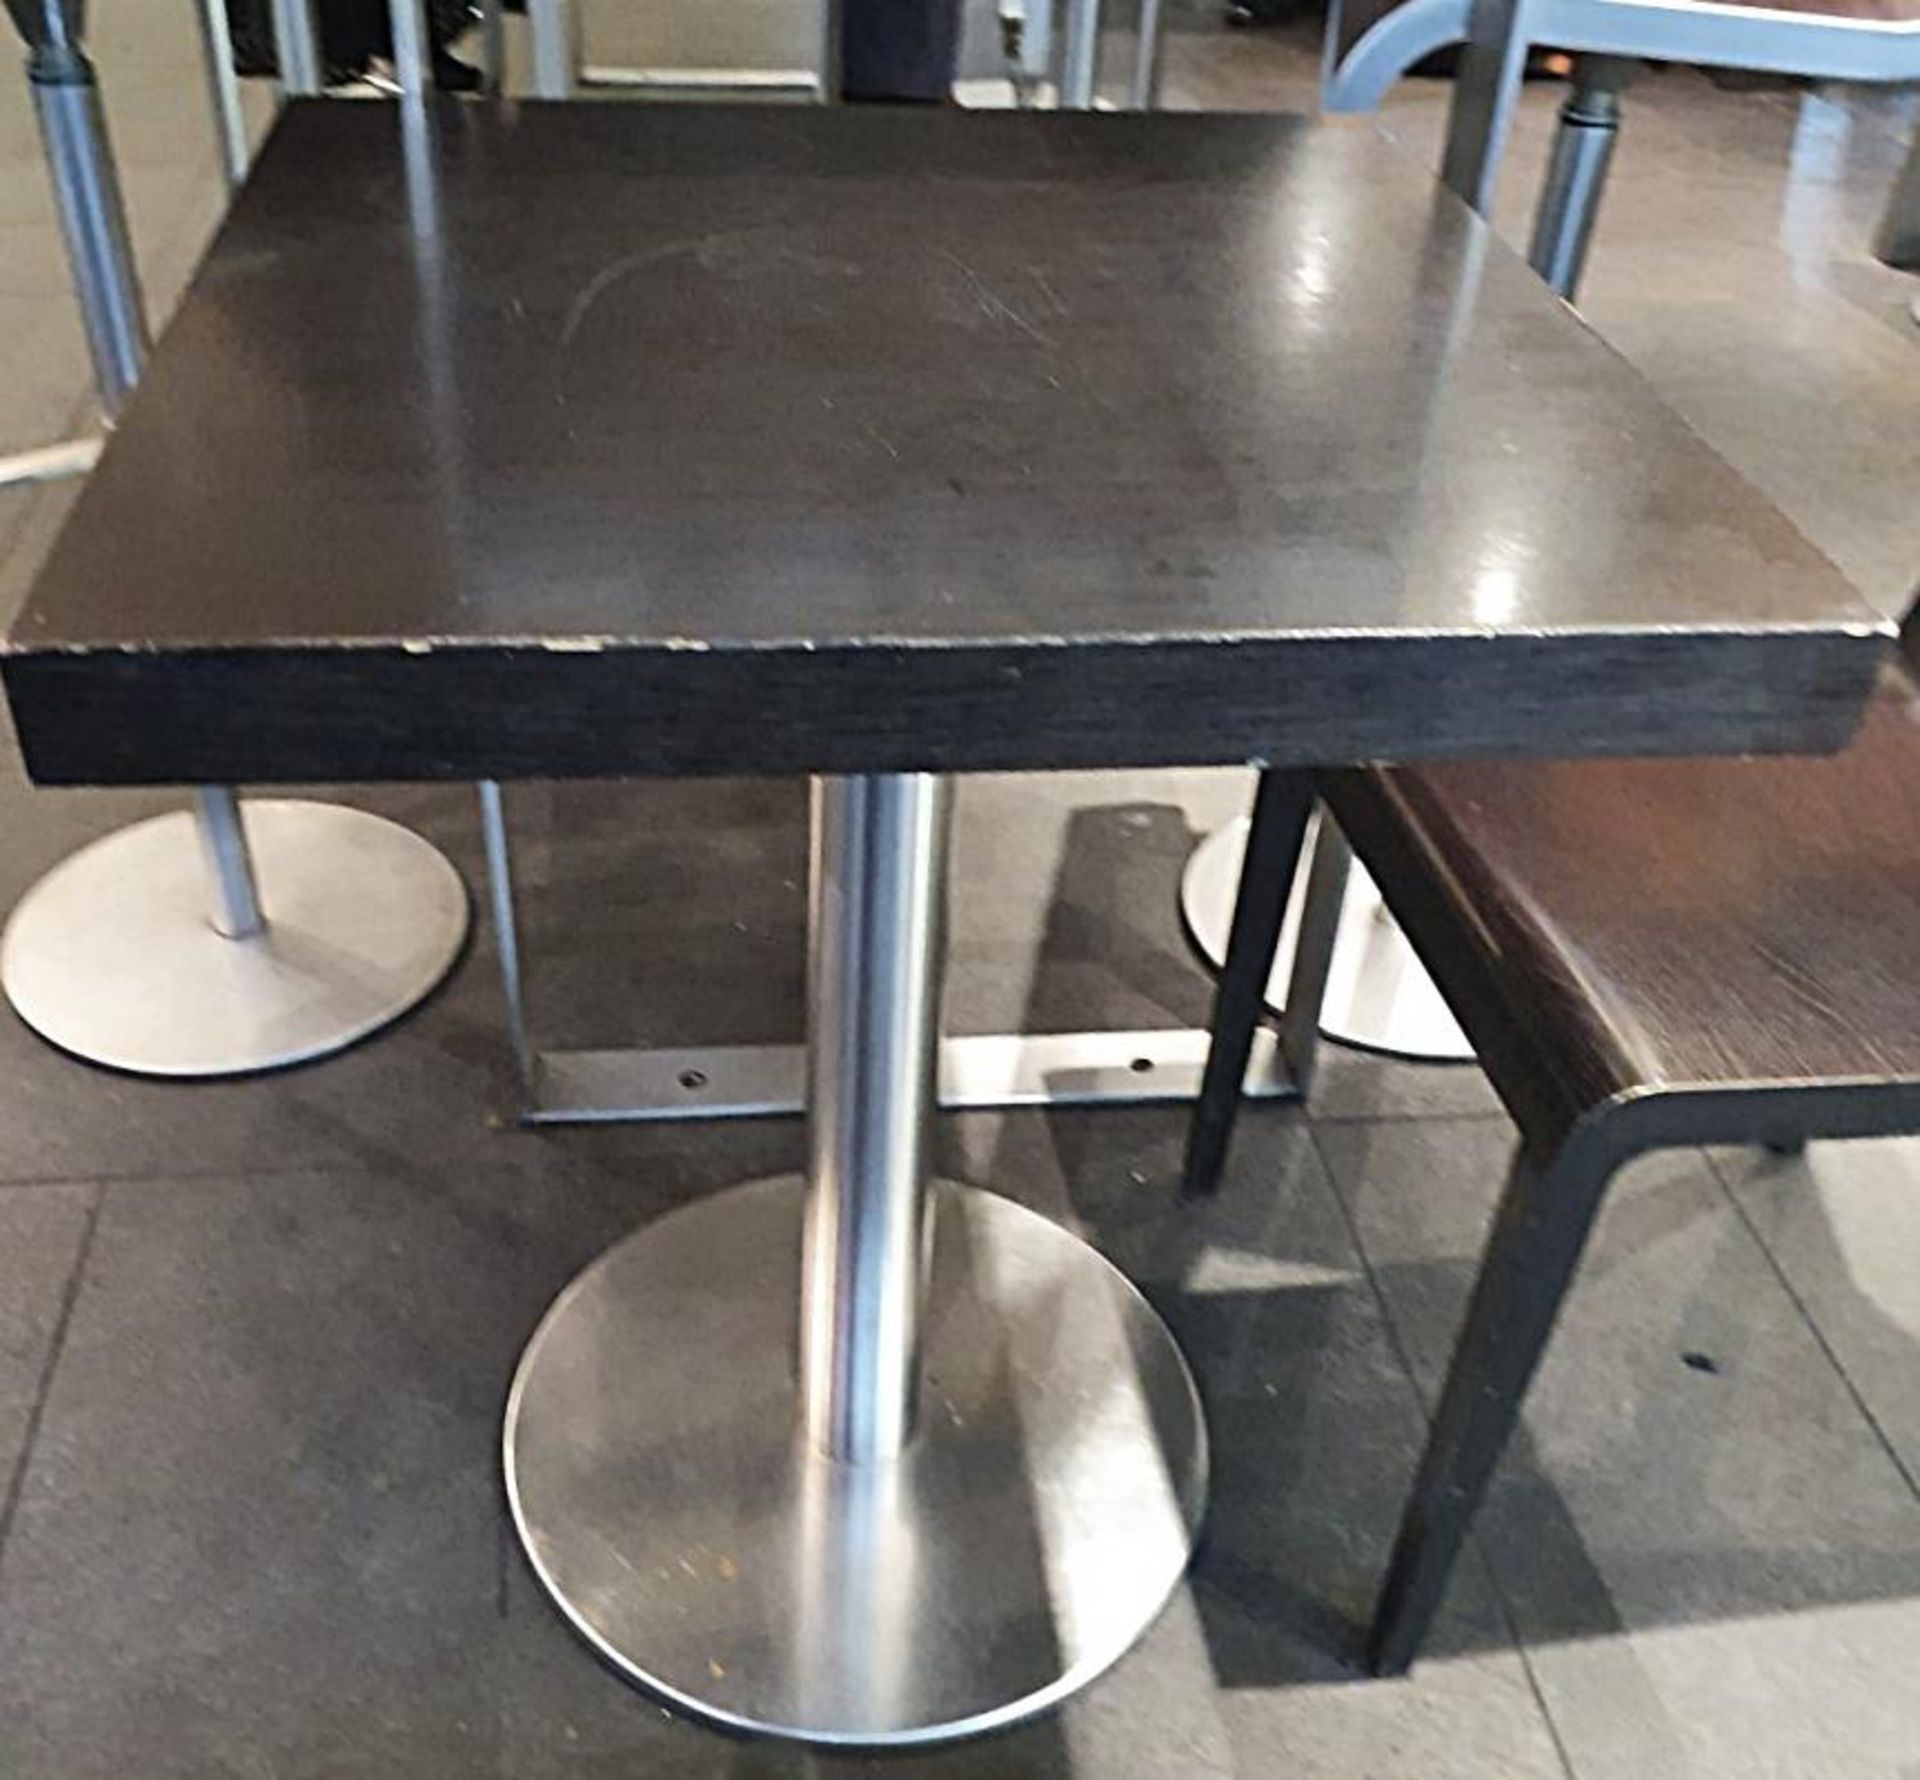 4 x Square Wood-Topped Bistro Tables With Metal Bases + 4 x Matching Wooden Chairs - Image 2 of 4